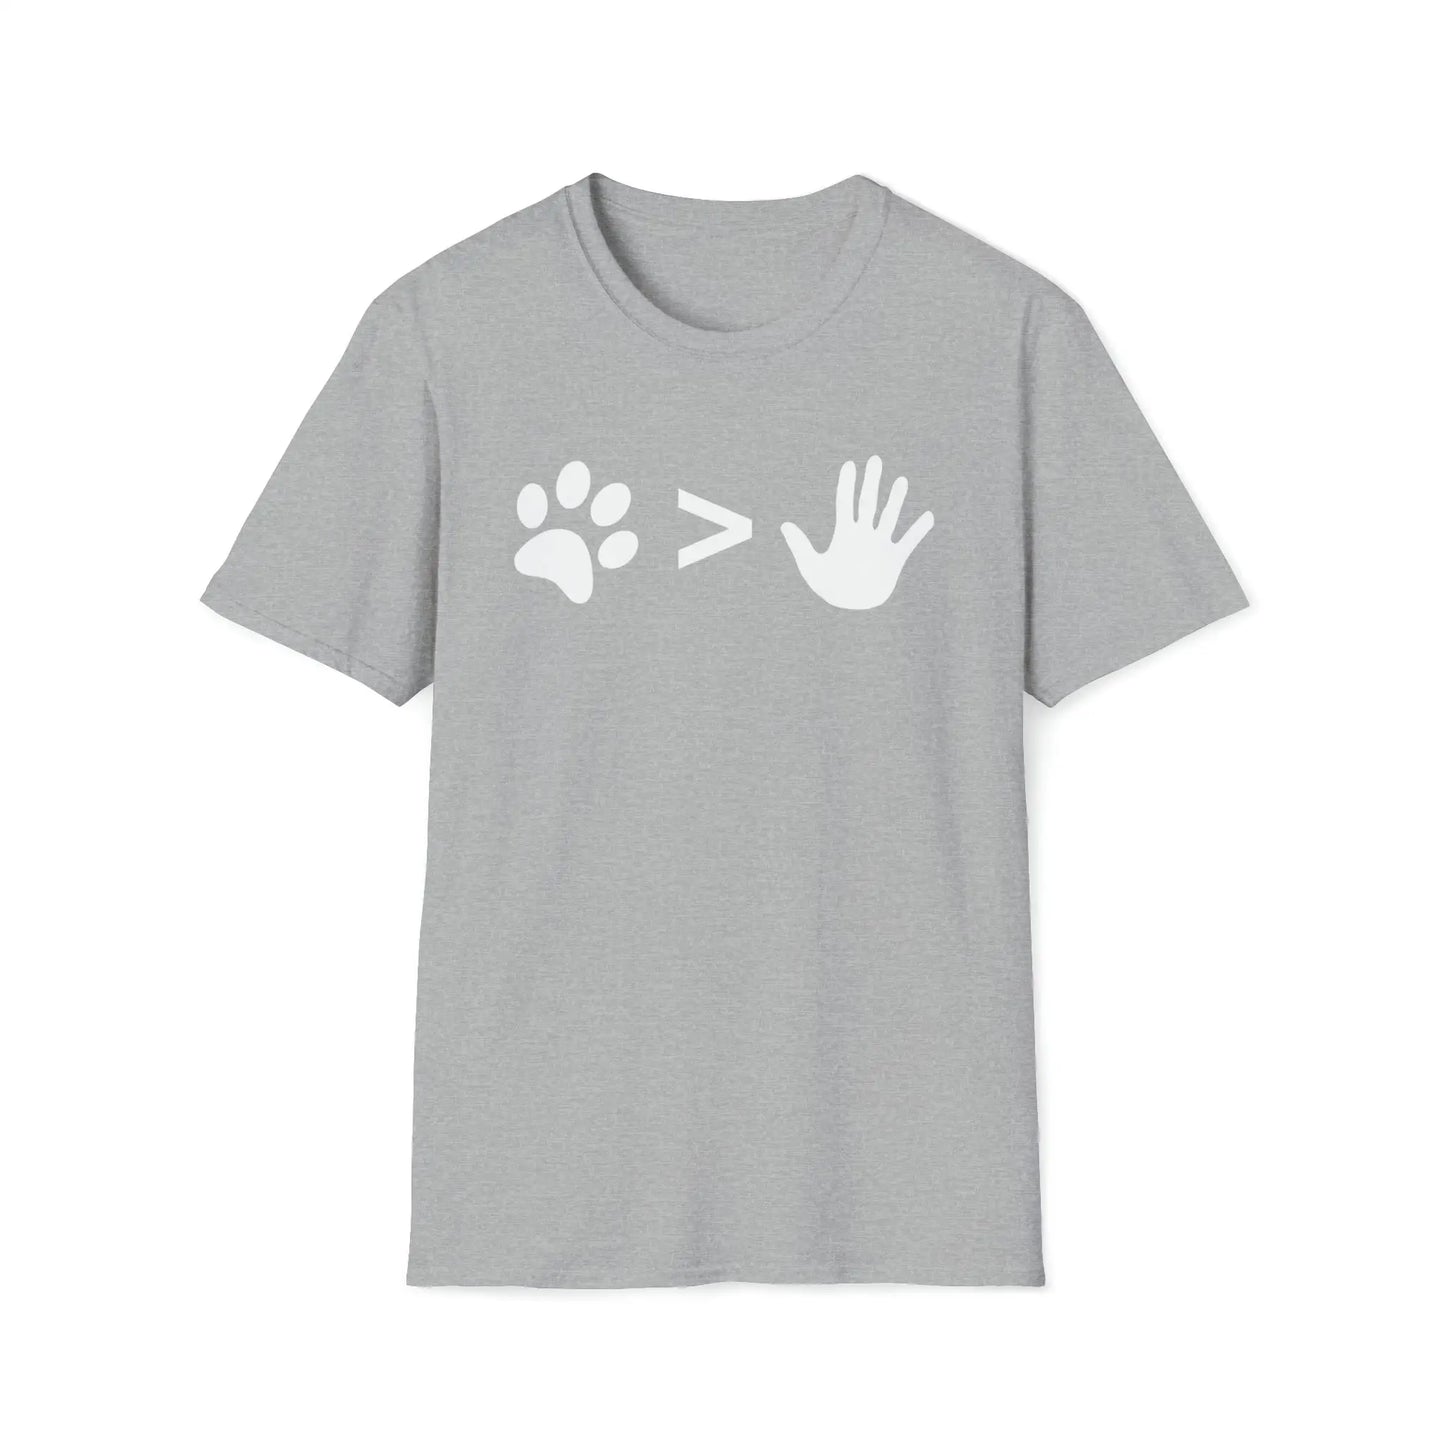 Pawsitively Superior Women's Tee - Wicked Tees